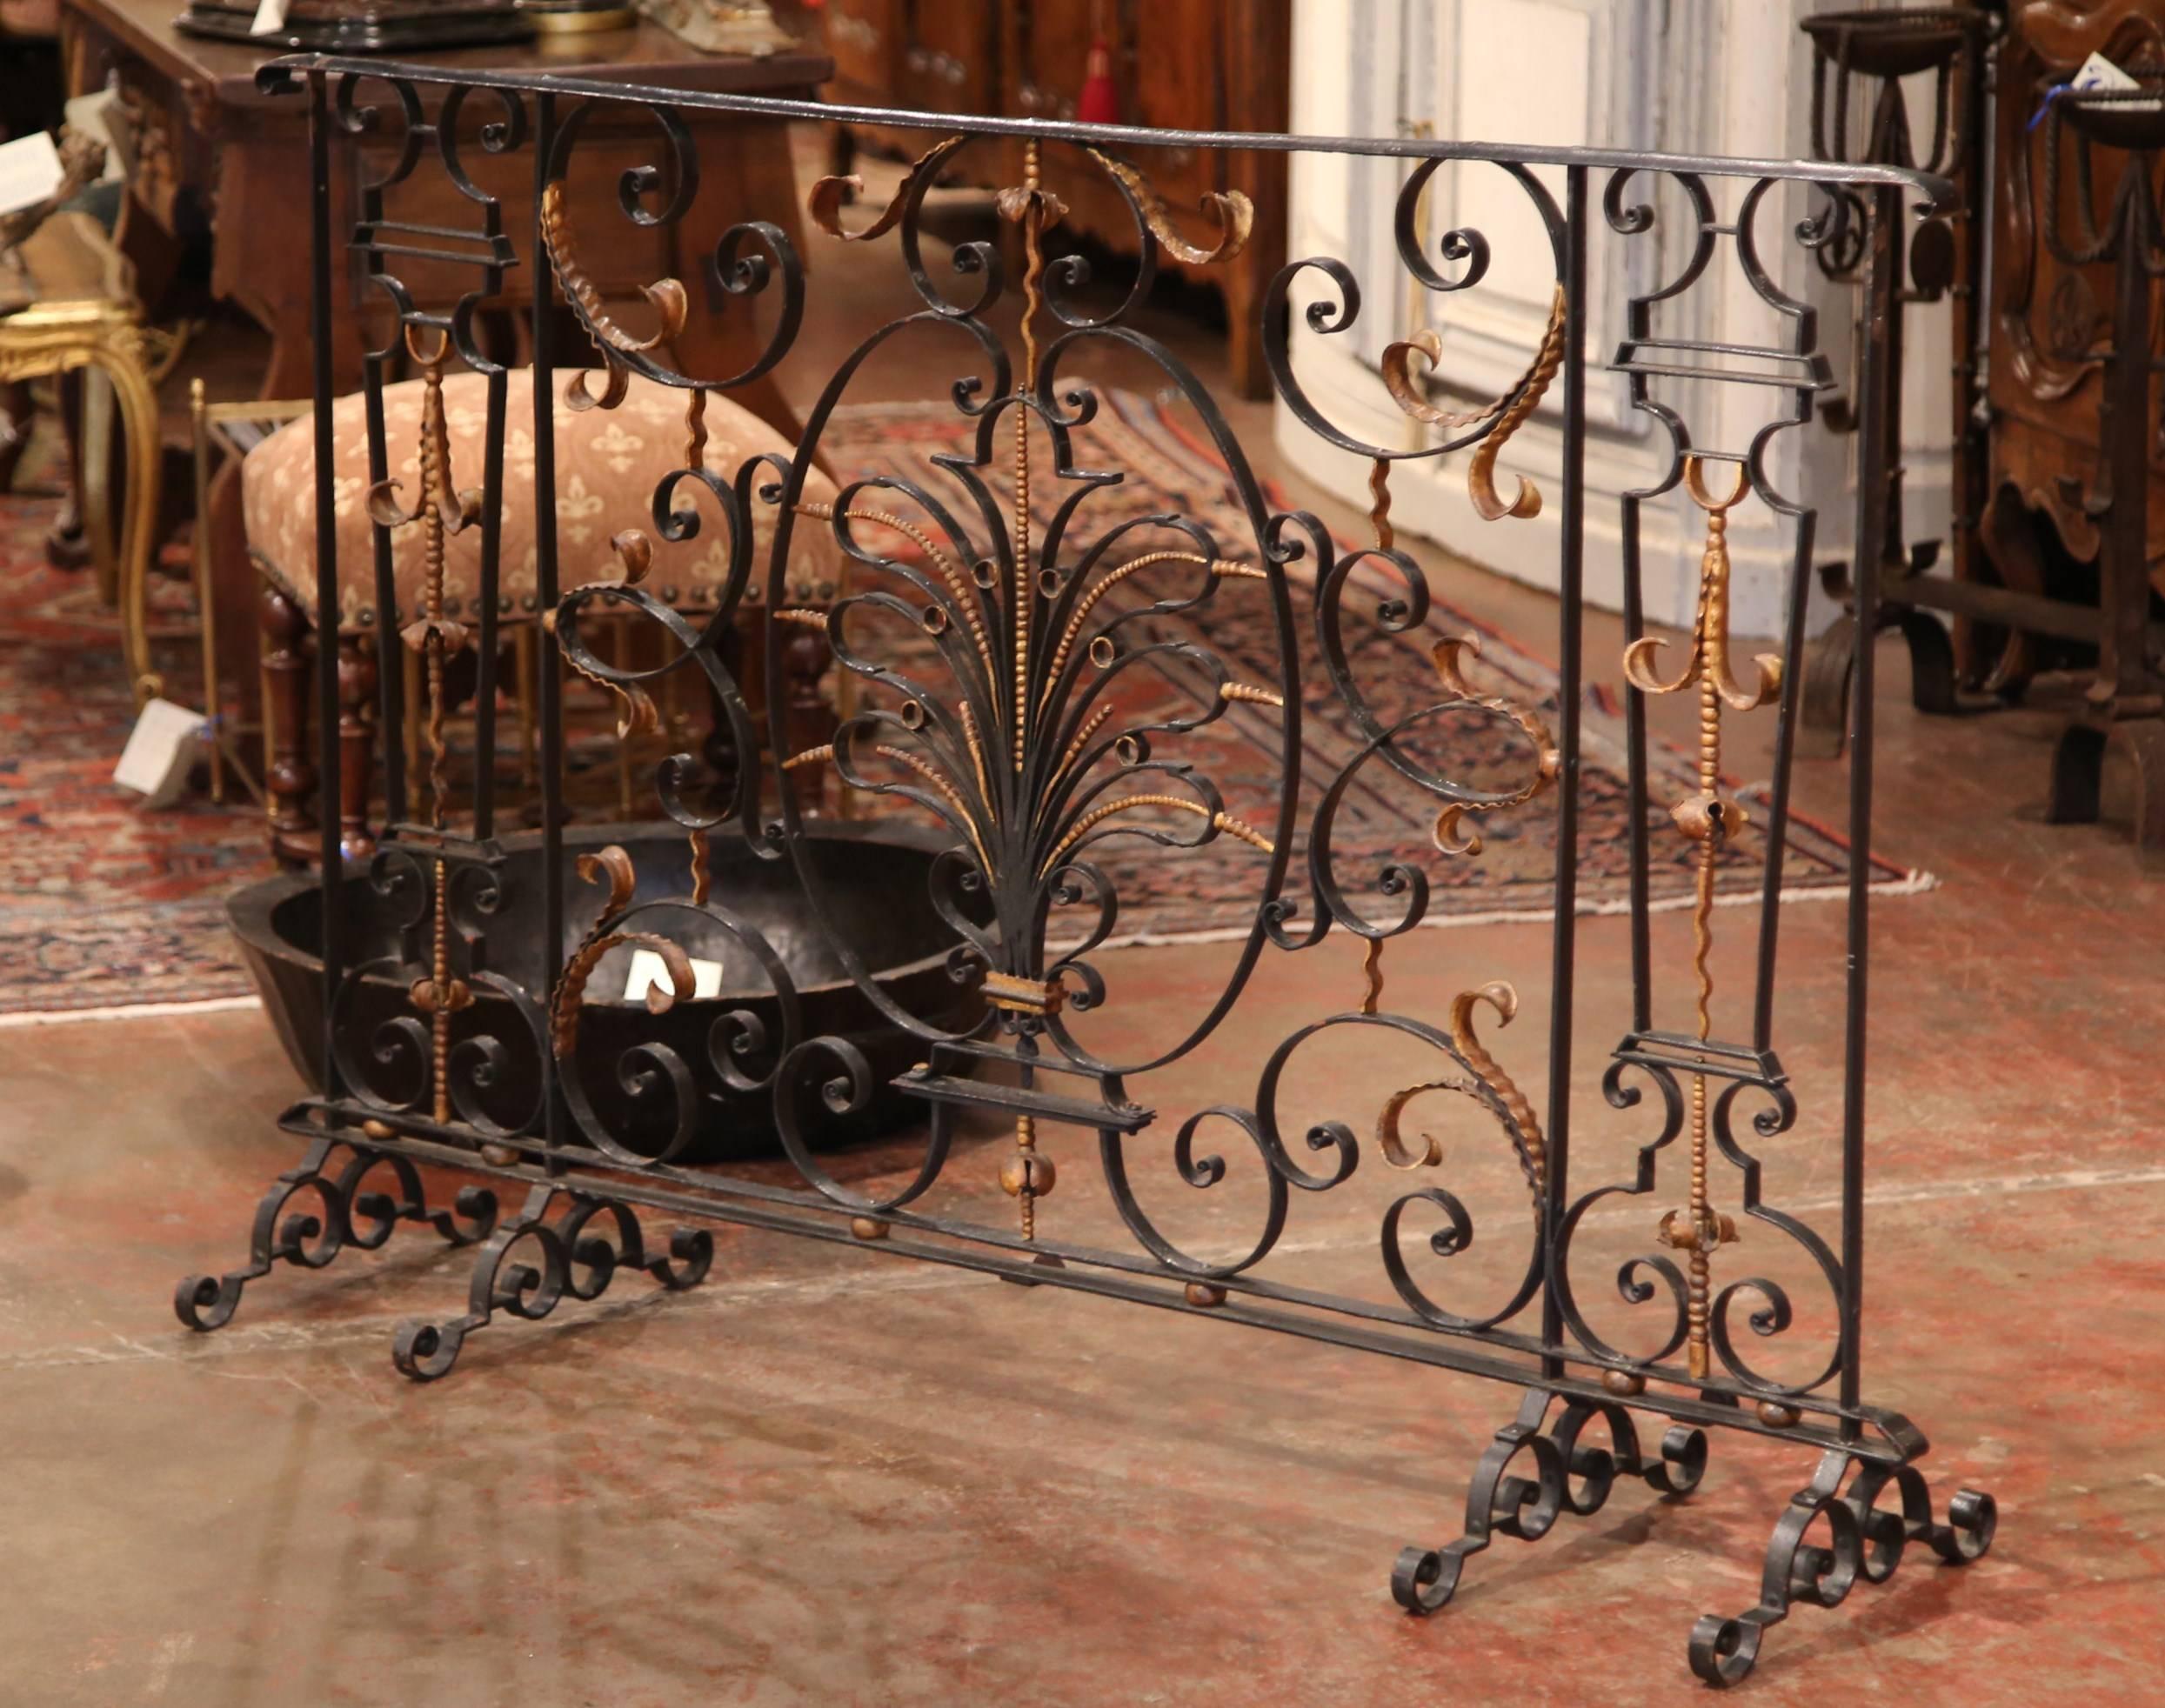 This beautifully forged antique balcony was crafted in France, circa 1780. The decorative balcony was transformed into a fireplace screen that features beautiful scrolled iron work with gilt accents. The black screen stands on four sturdy, cast iron